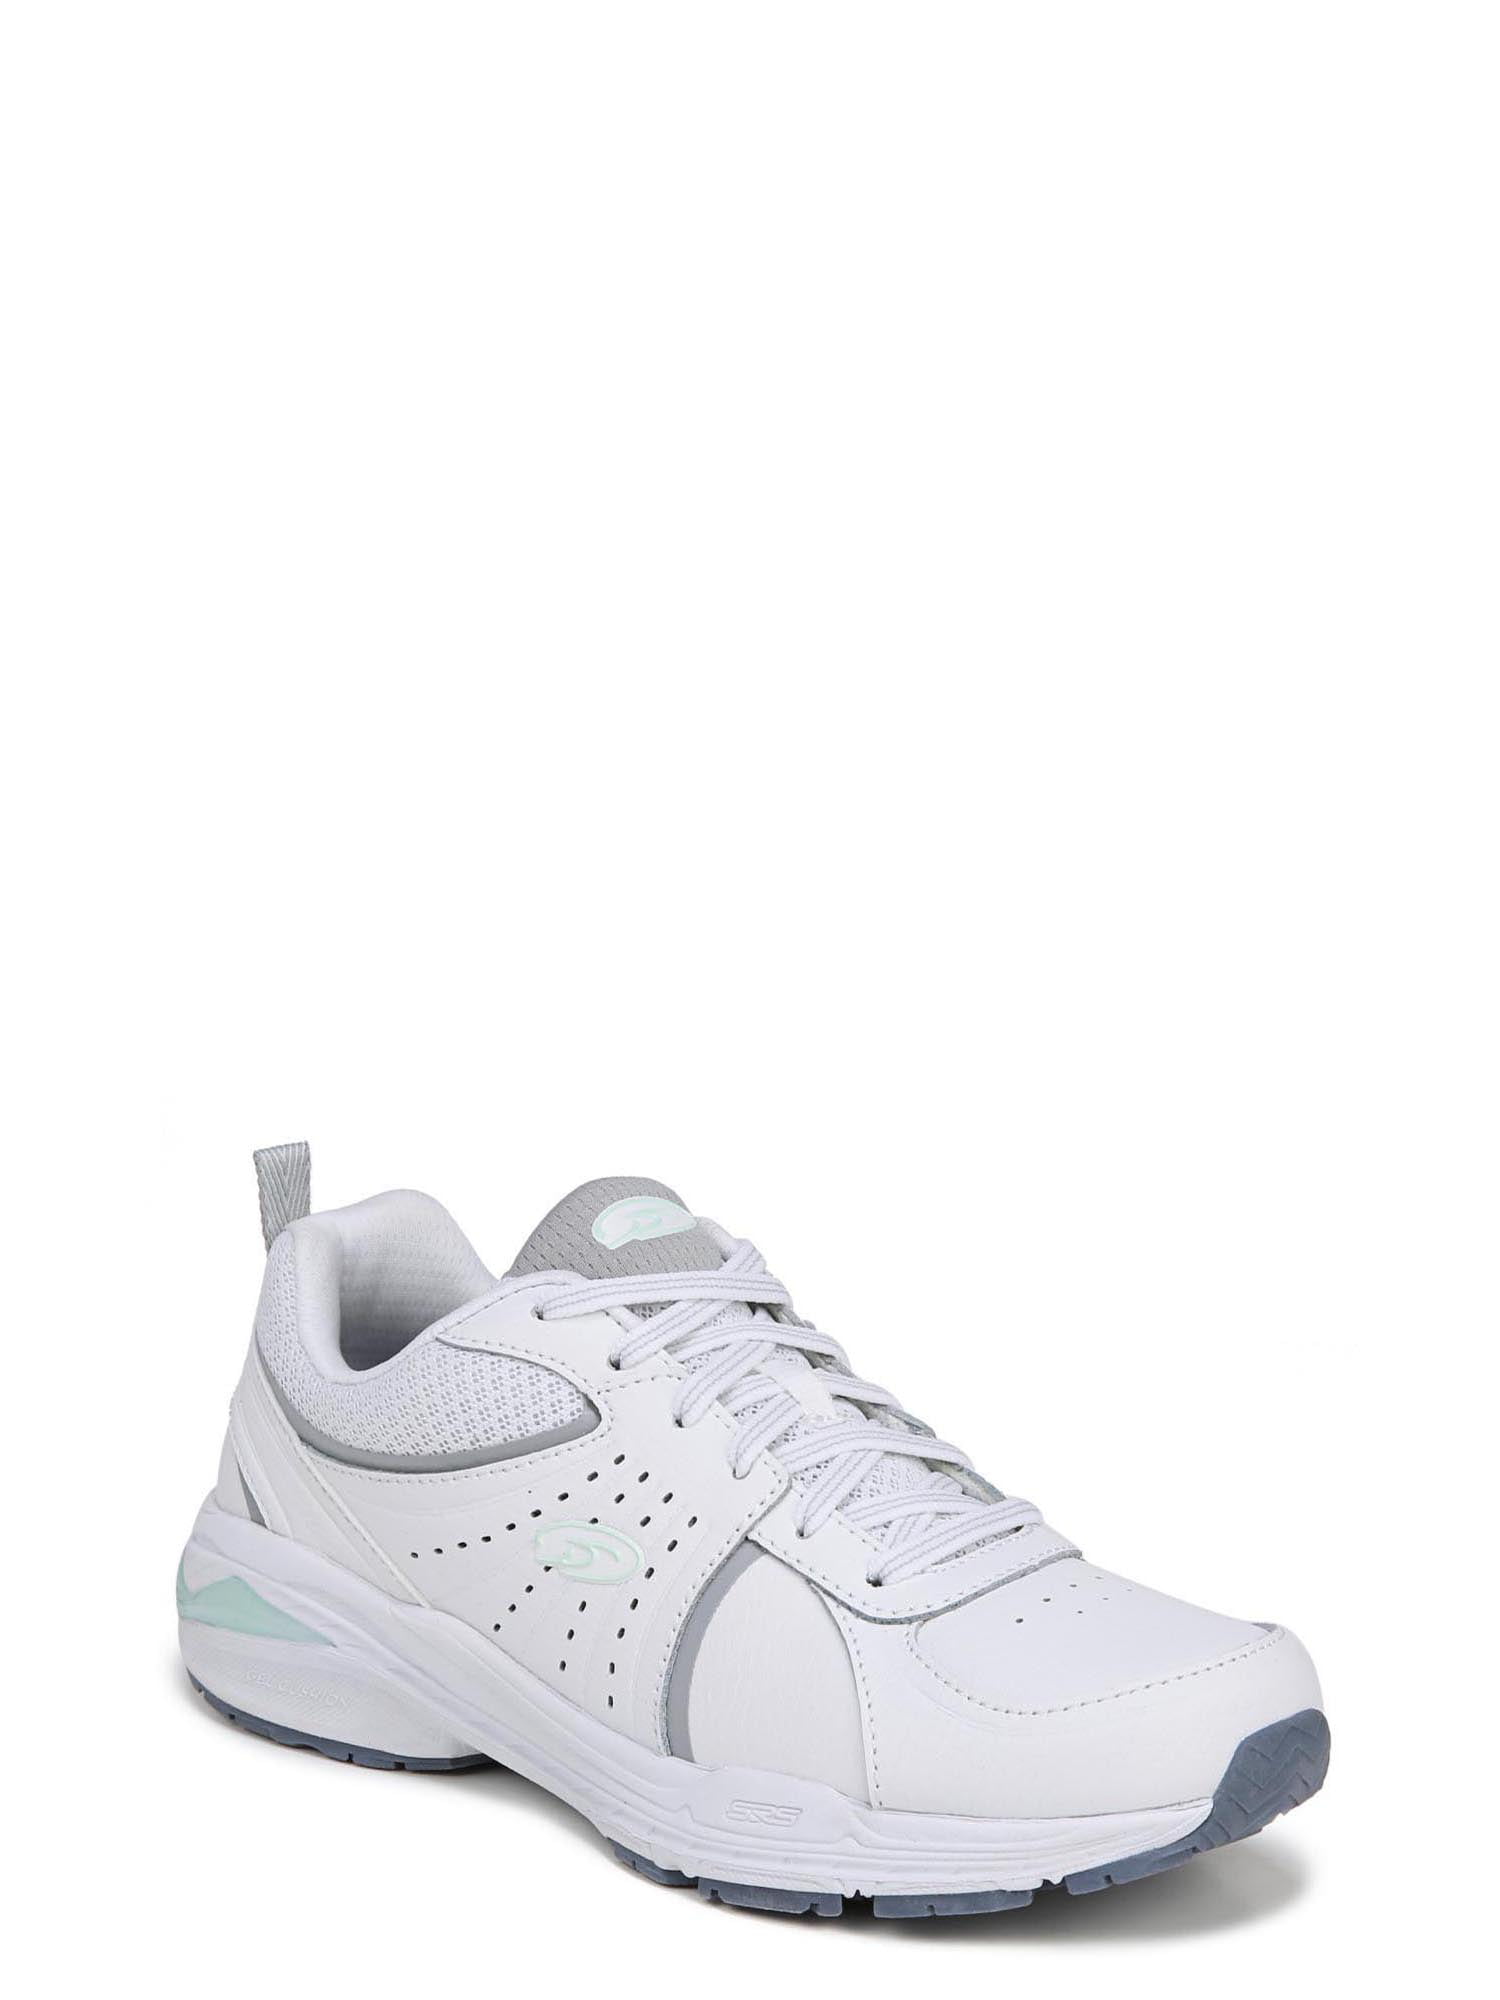 Dr. Scholl's Women's Time Off Lace Up Sneaker